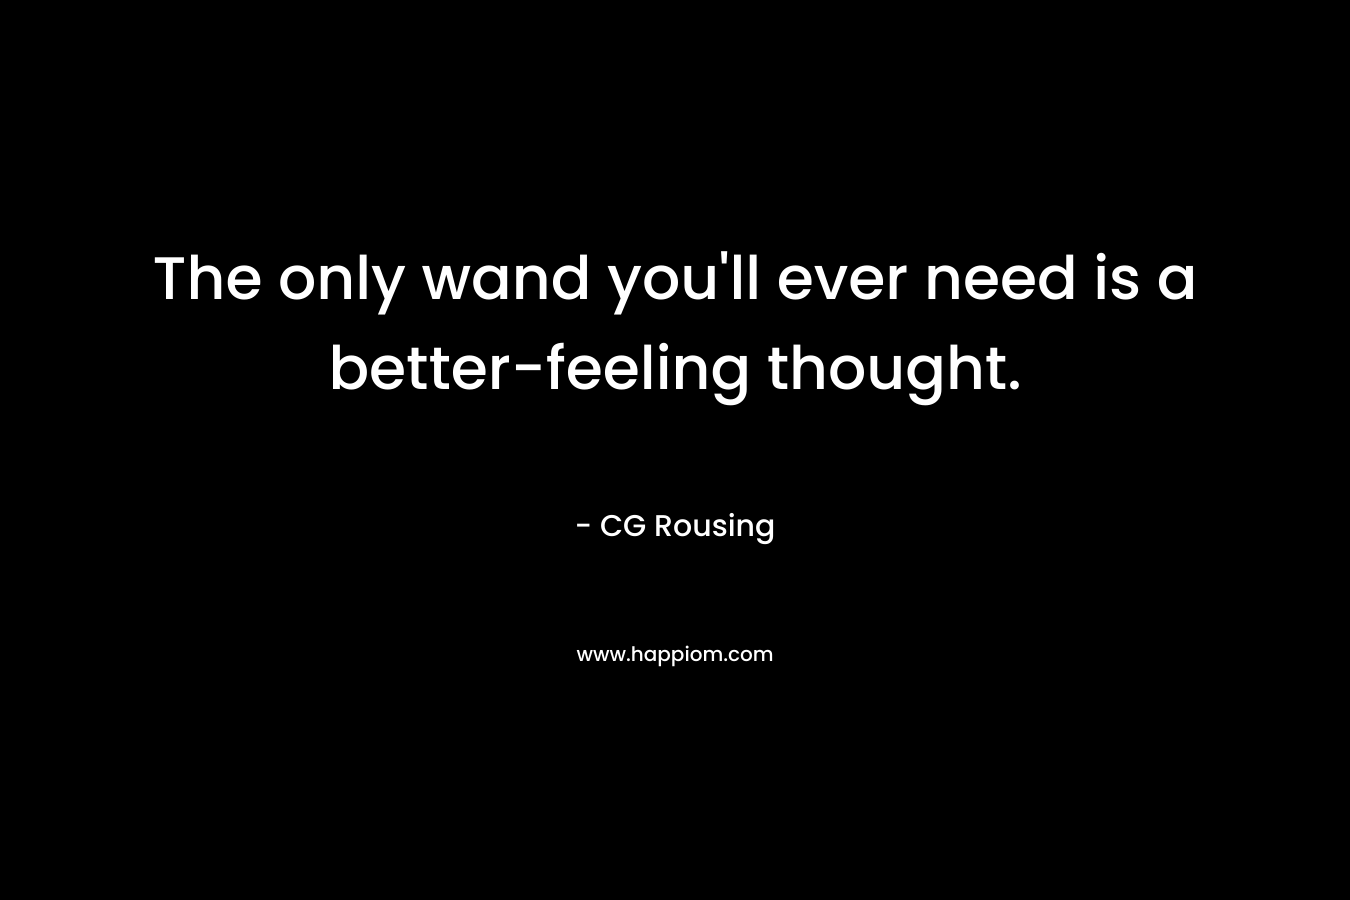 The only wand you’ll ever need is a better-feeling thought. – CG Rousing